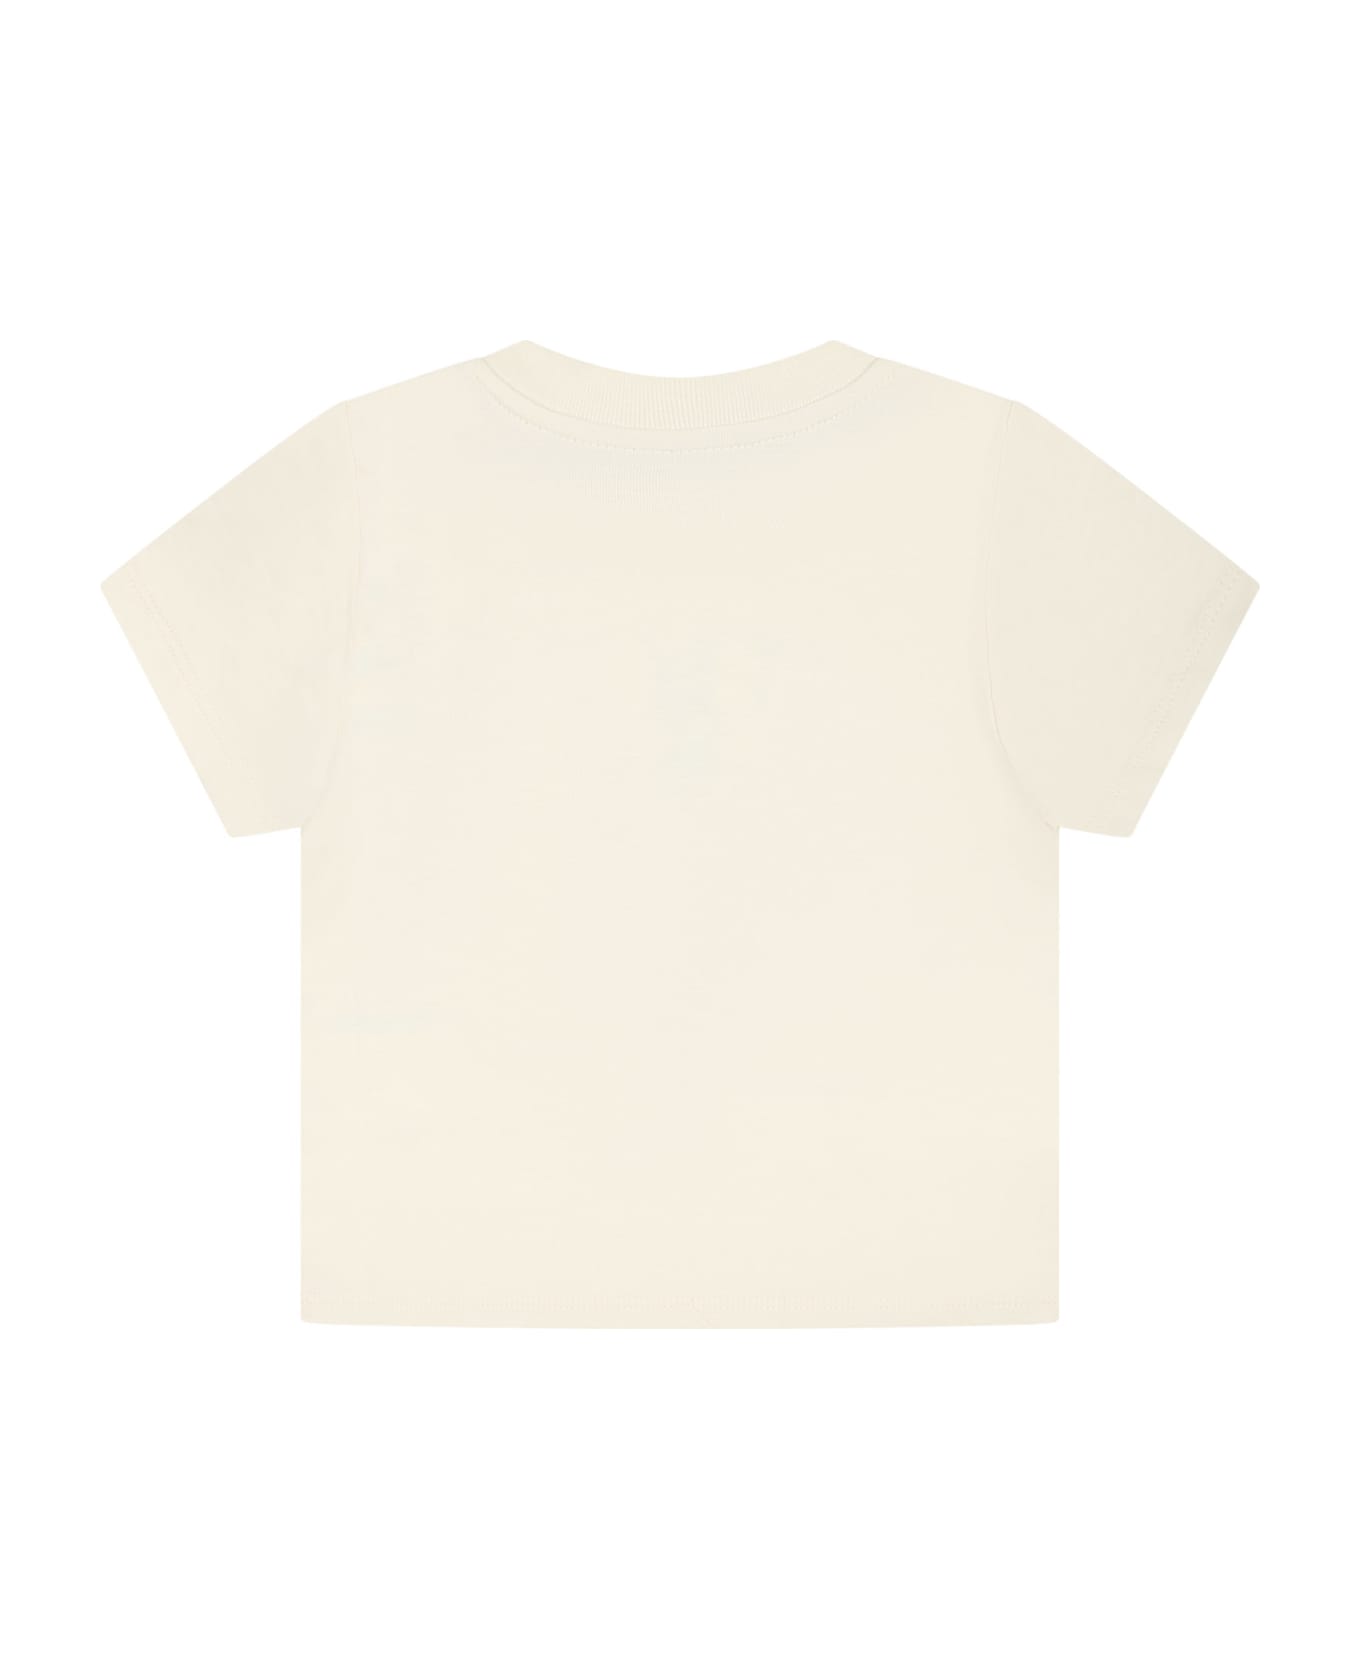 Gucci Ivory T-shirt For Baby Girl With Peter Rabbit